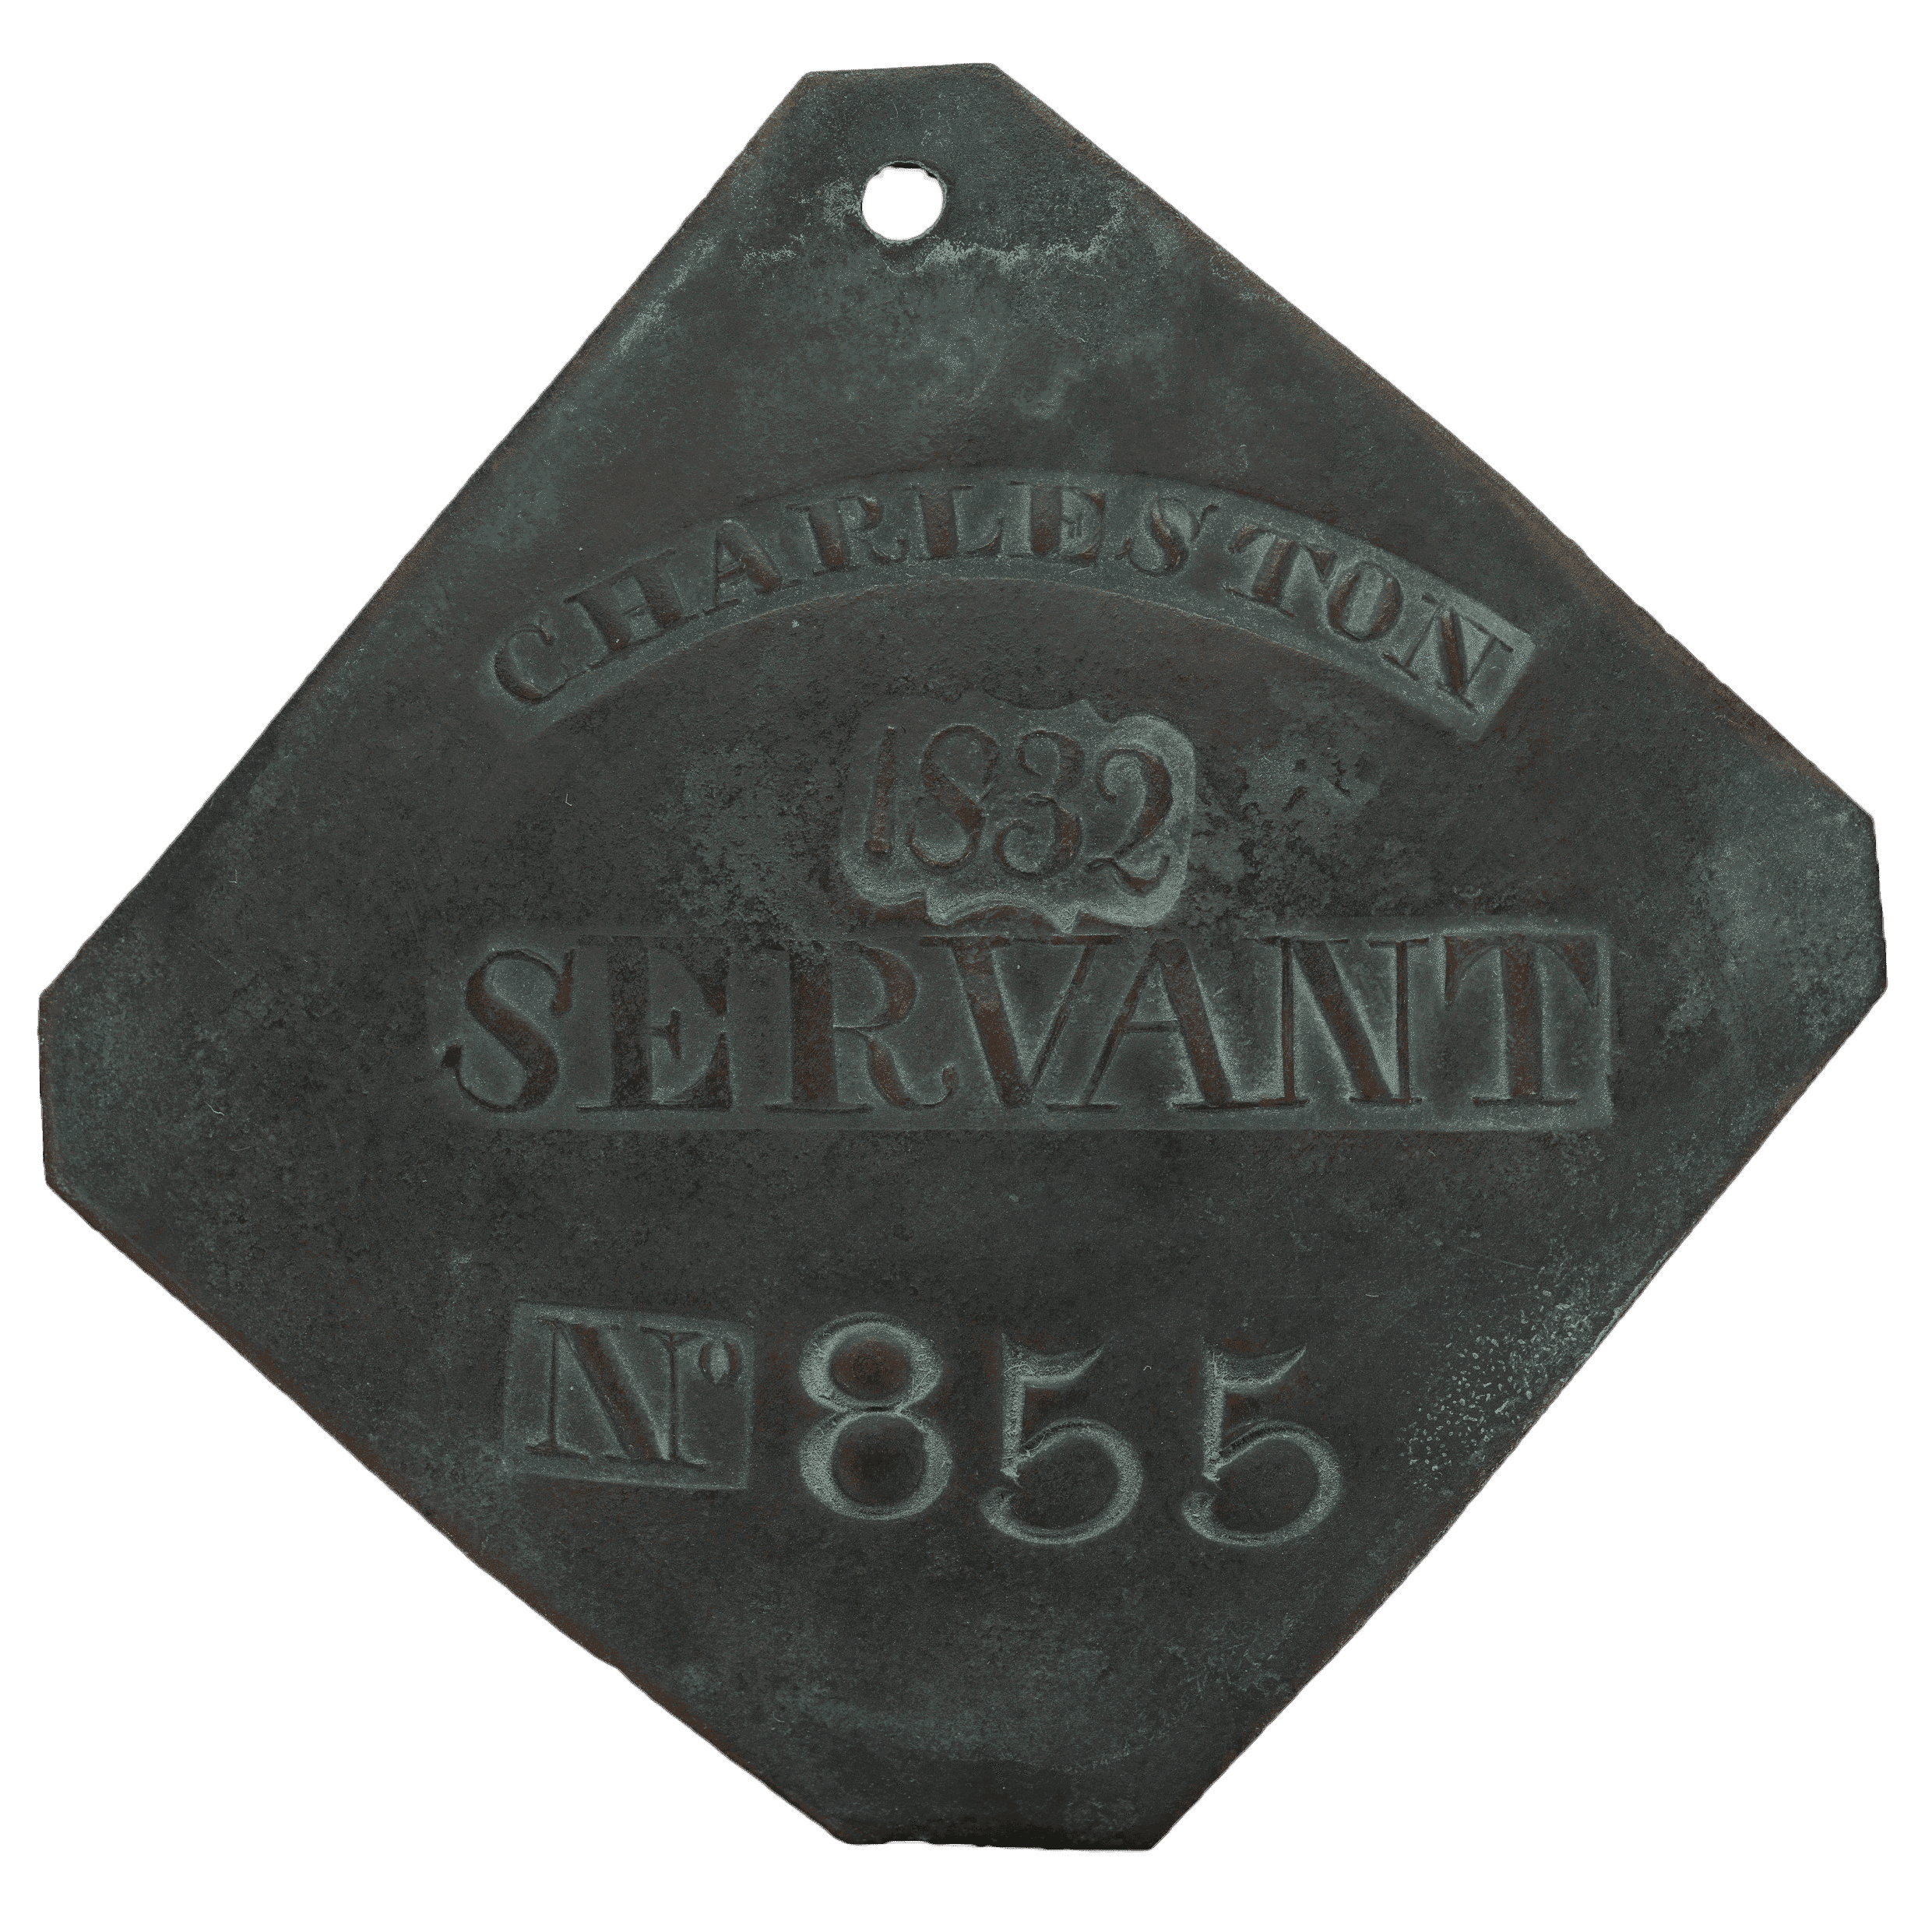 Square metal slave badge set on point with clipped corners.  It is engraved "CHARLESTON / 1832 / SERVANT / 855"